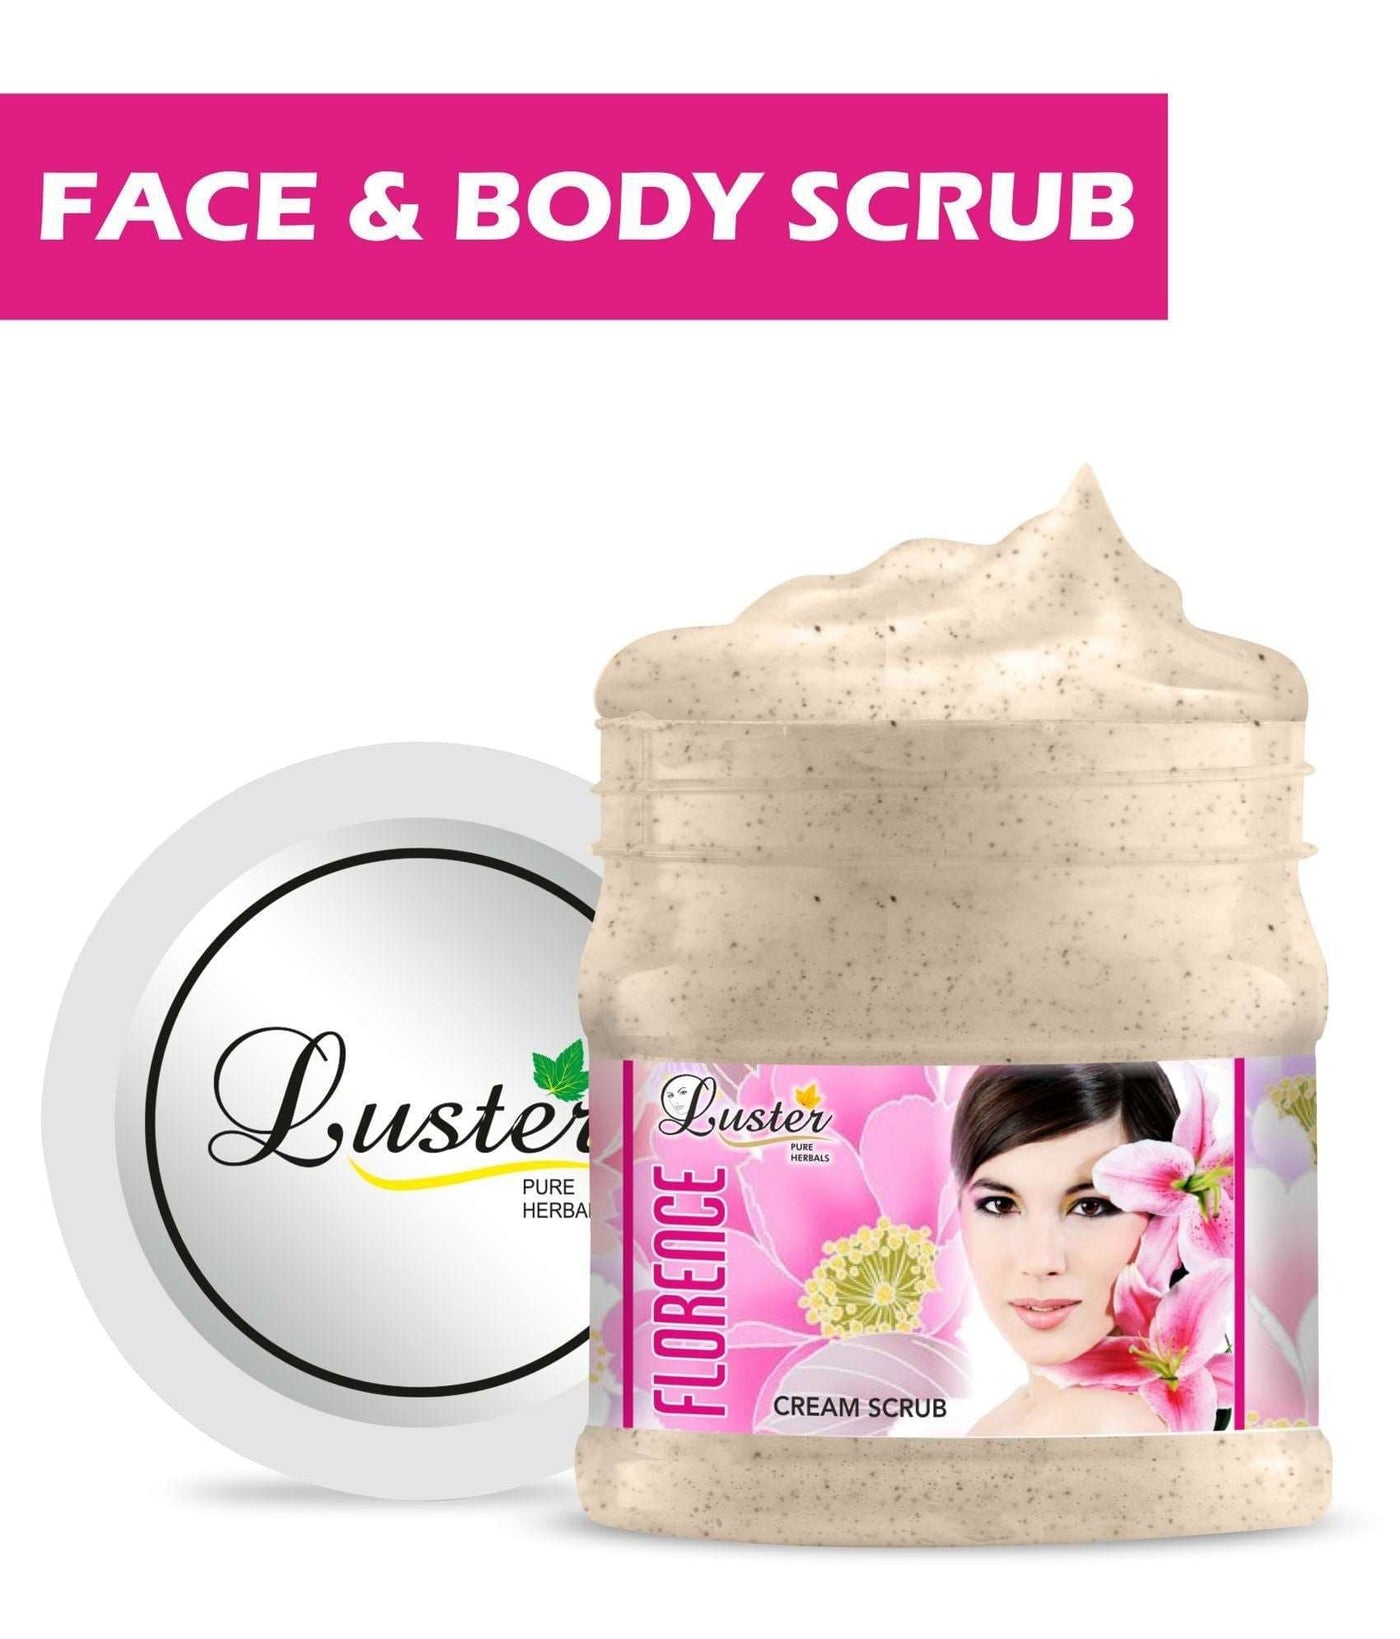 Luster Florence Face & Body Cream Scrub (Paraben & Sulfate Free)-500 ml